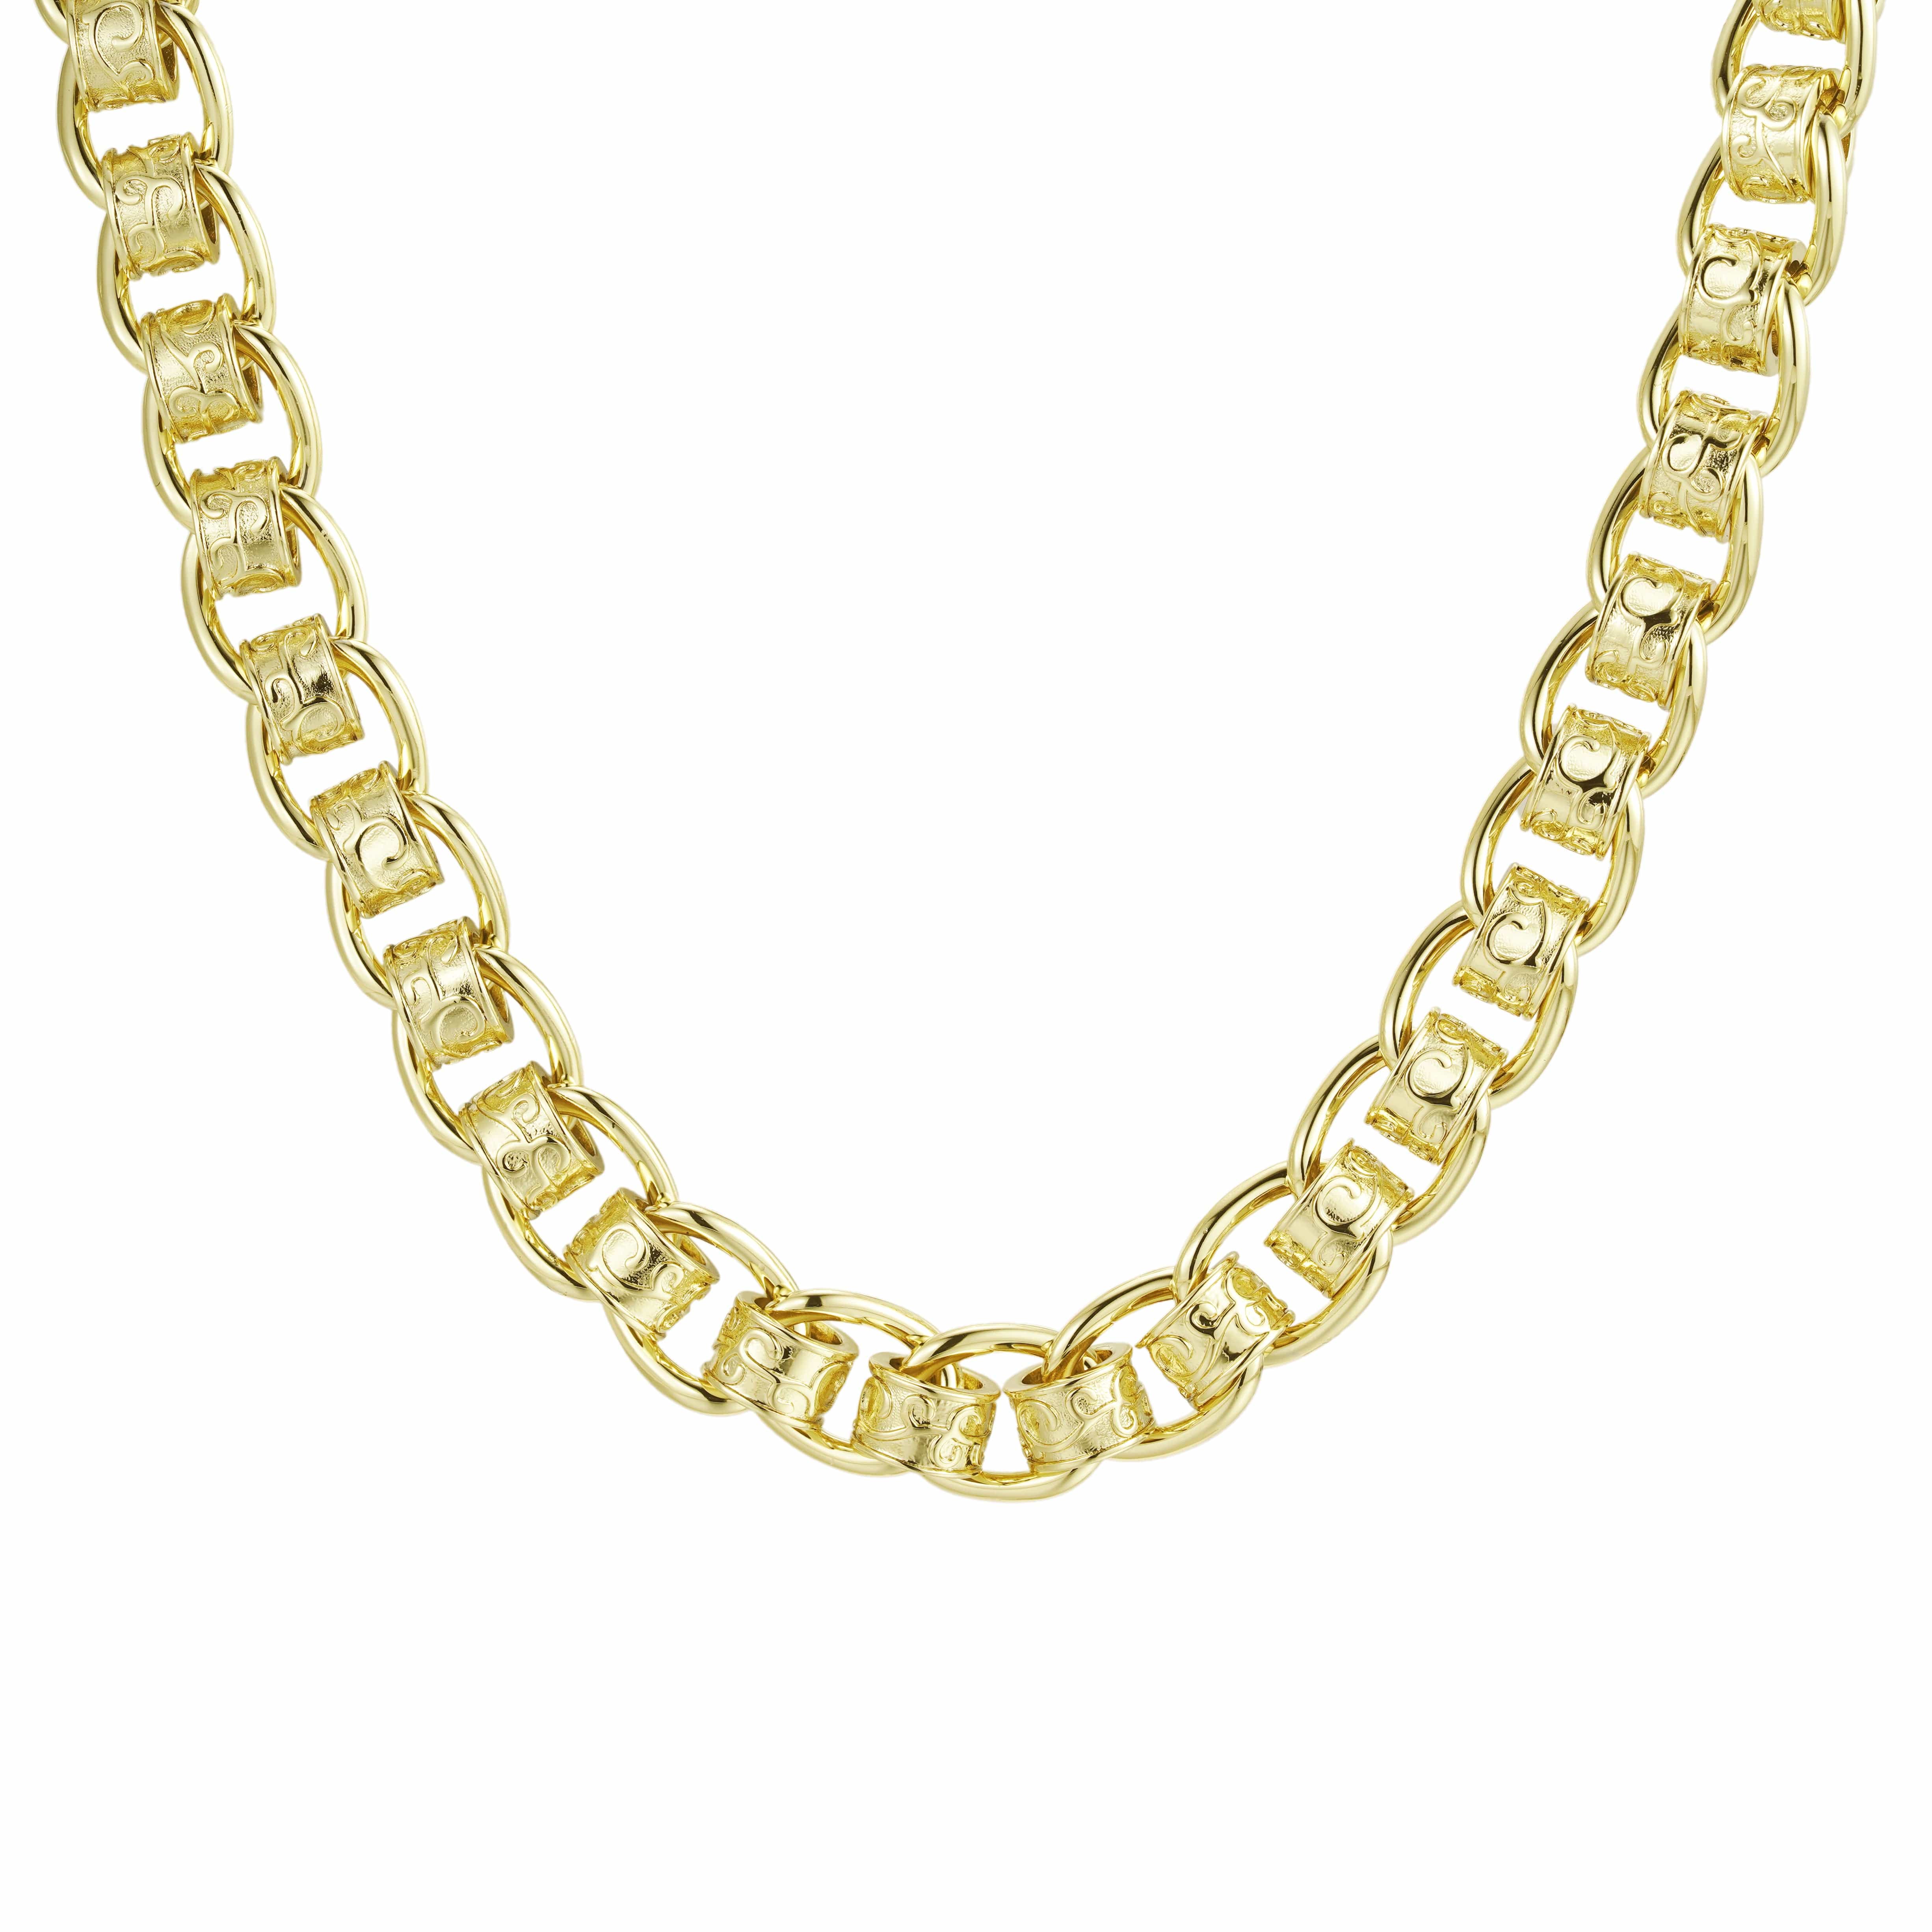 Gold Dipped Chains Patterned Rollerball Chain 11mm - Gold